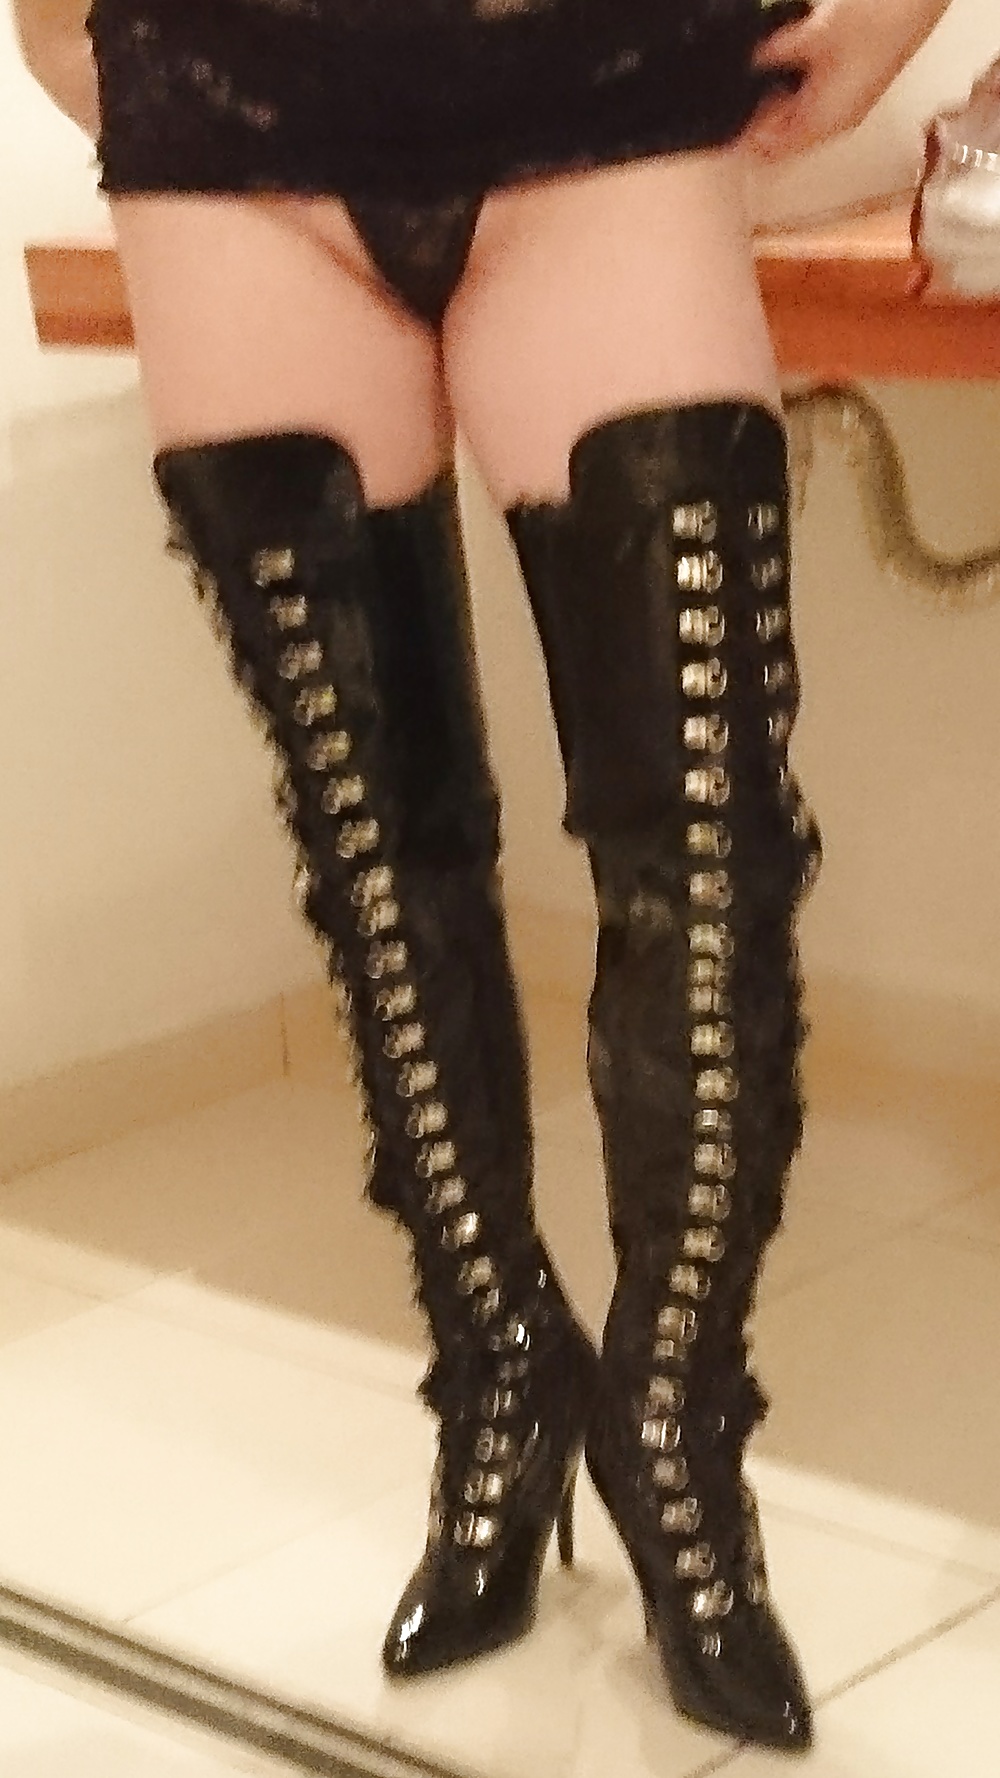 Wife_in_boots (8/9)